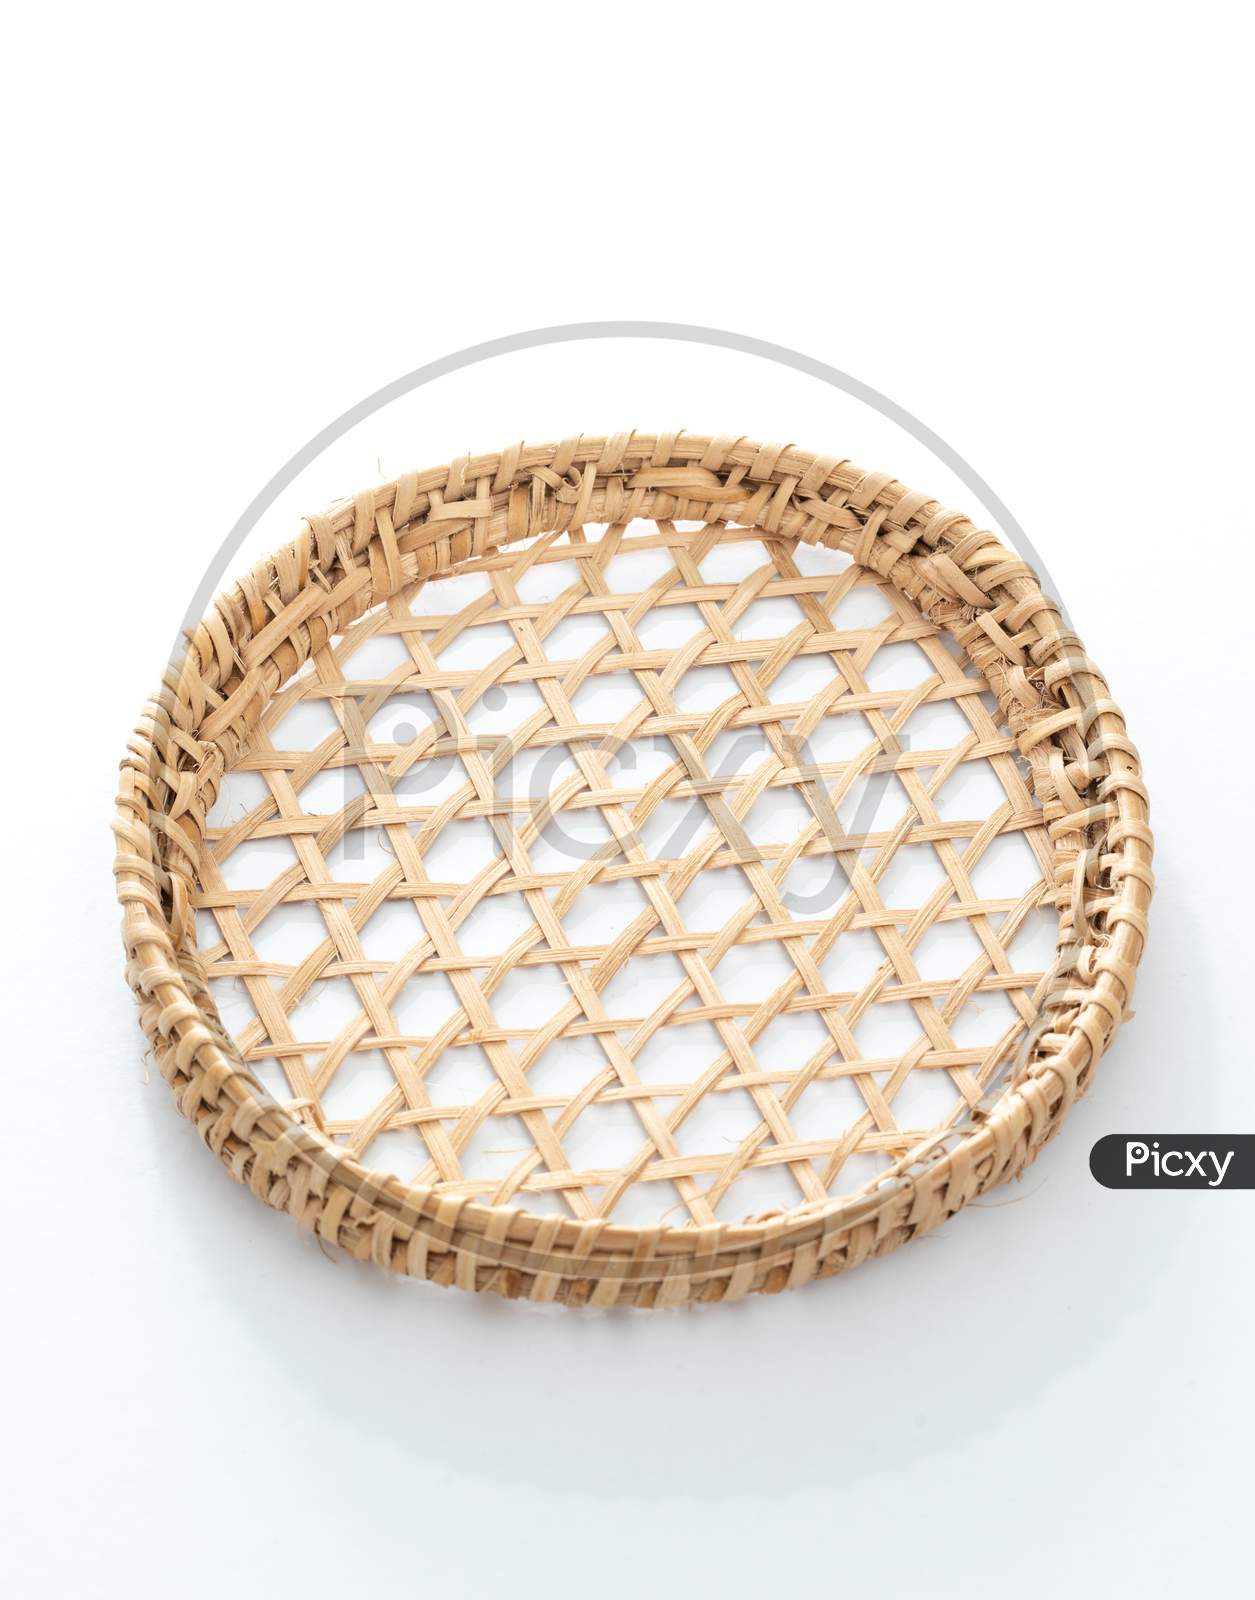 Bamboo String Hoppers (Idayyapam) Makers For Tradisional Food From India With White Background